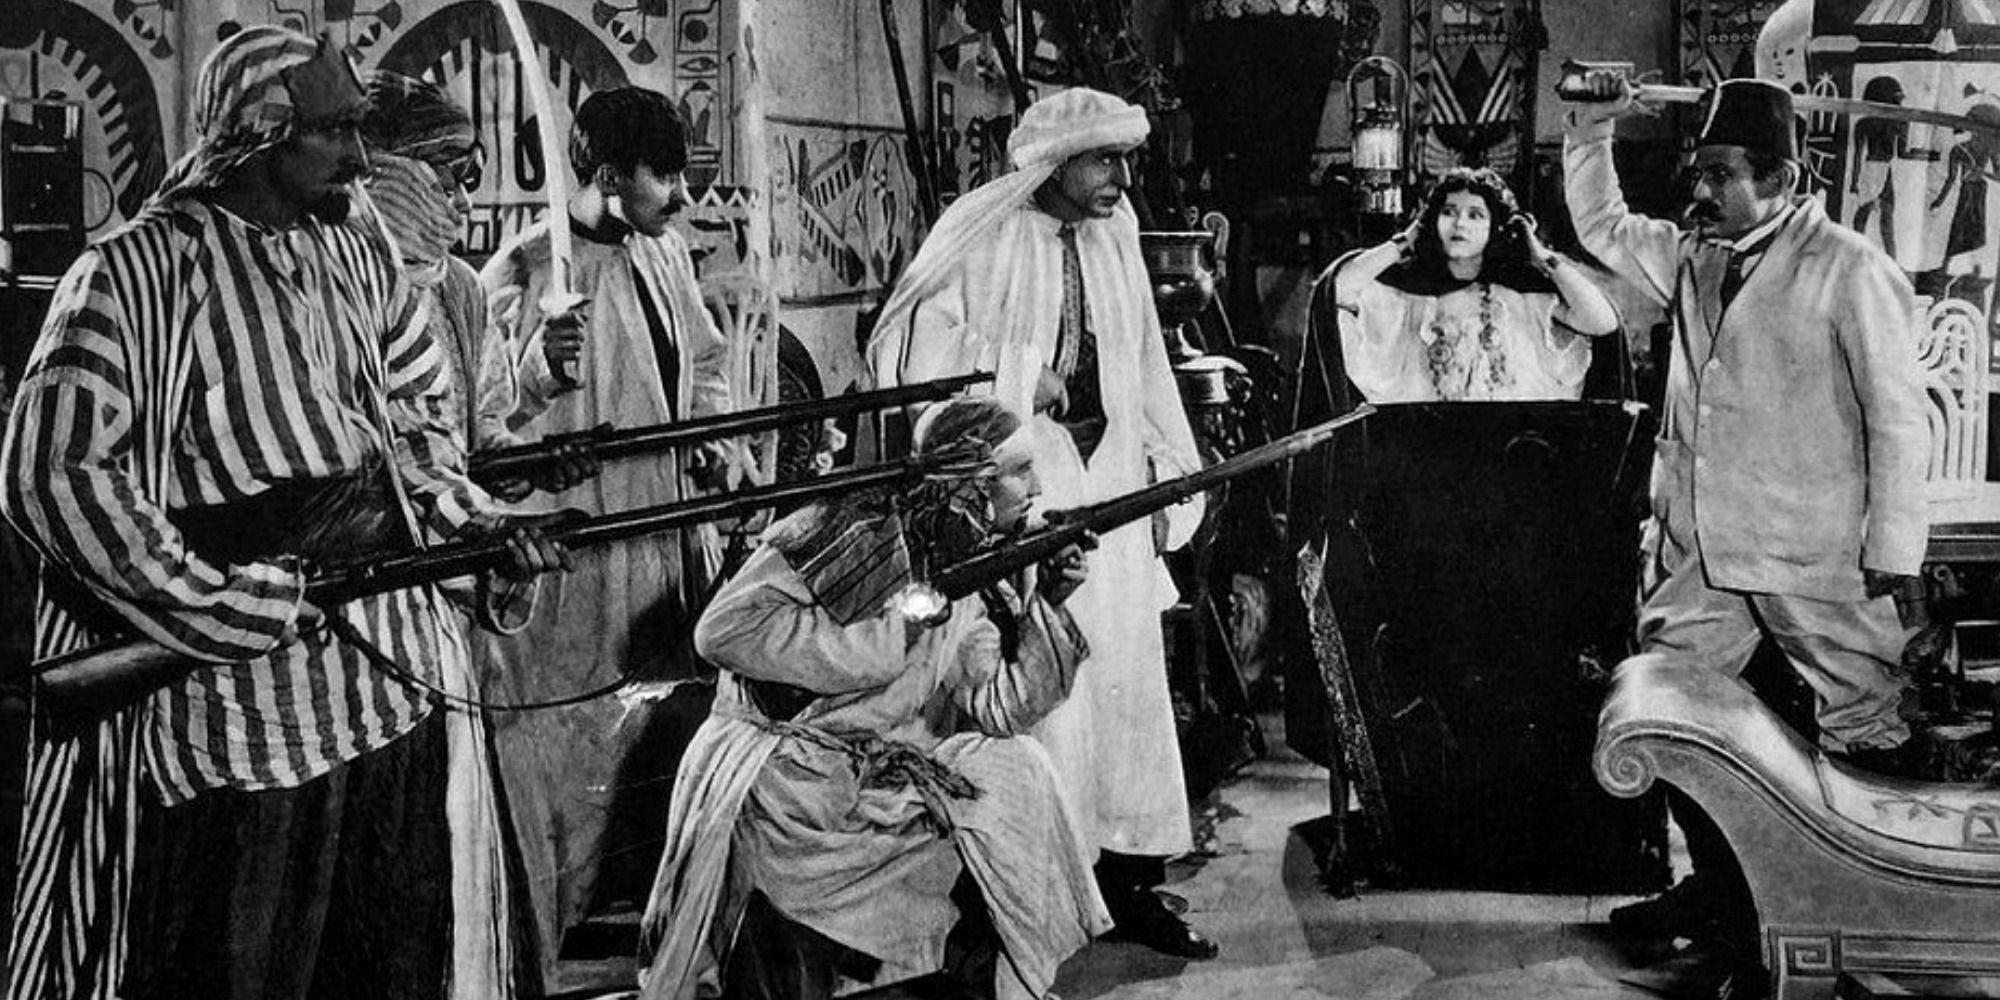 A screenshot of a promotional image from The Fortieth Door (1924)